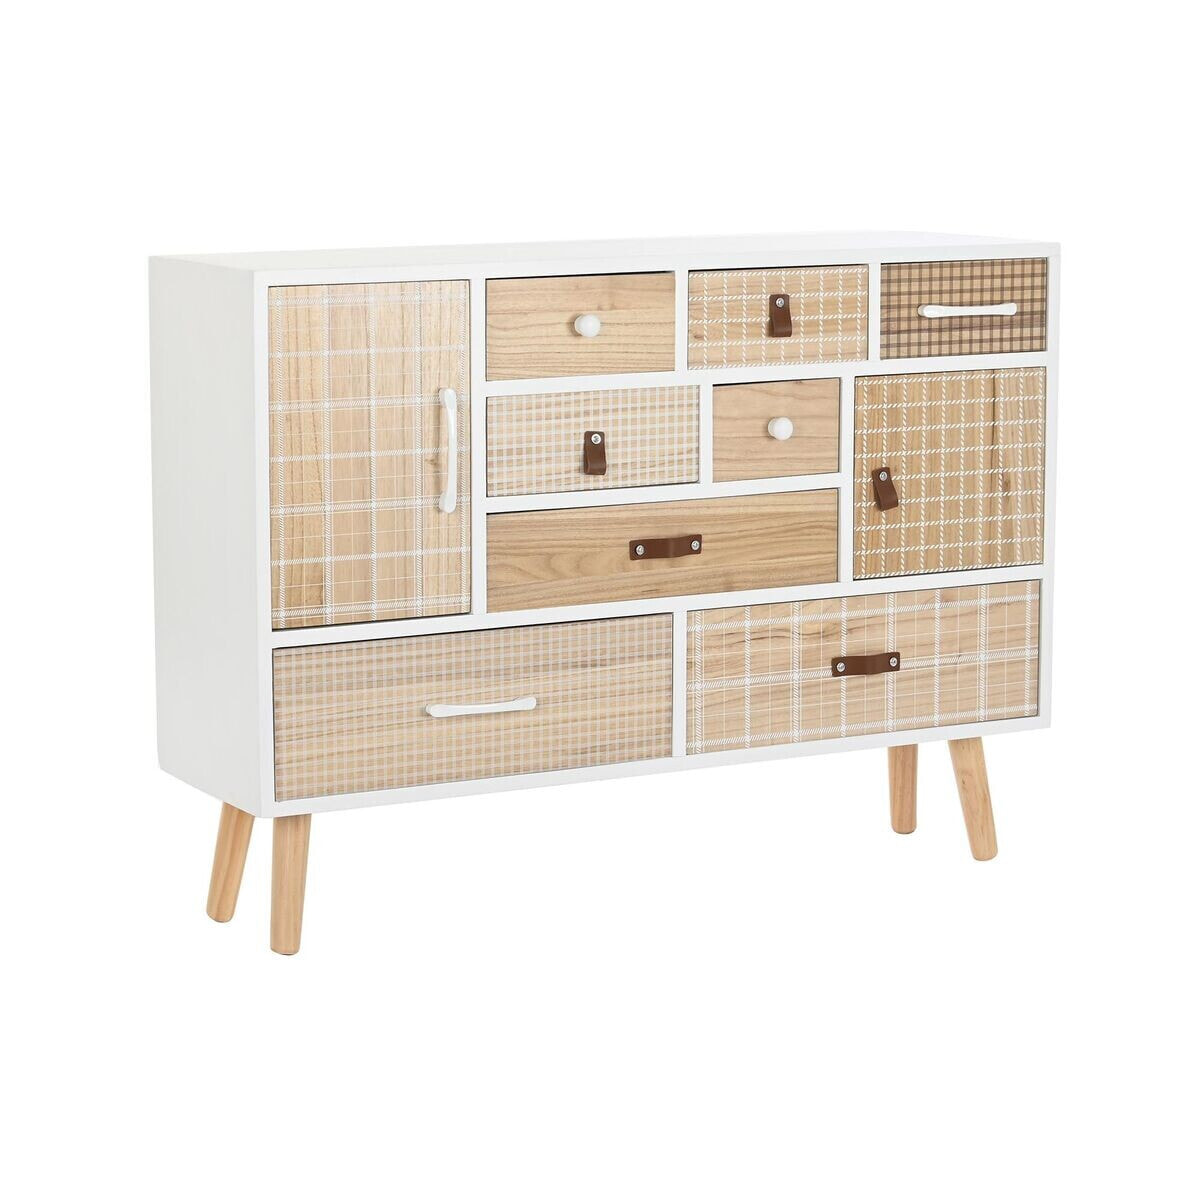 Sideboard DKD Home Decor White Natural Paolownia wood 95 x 26 x 67,5 cm